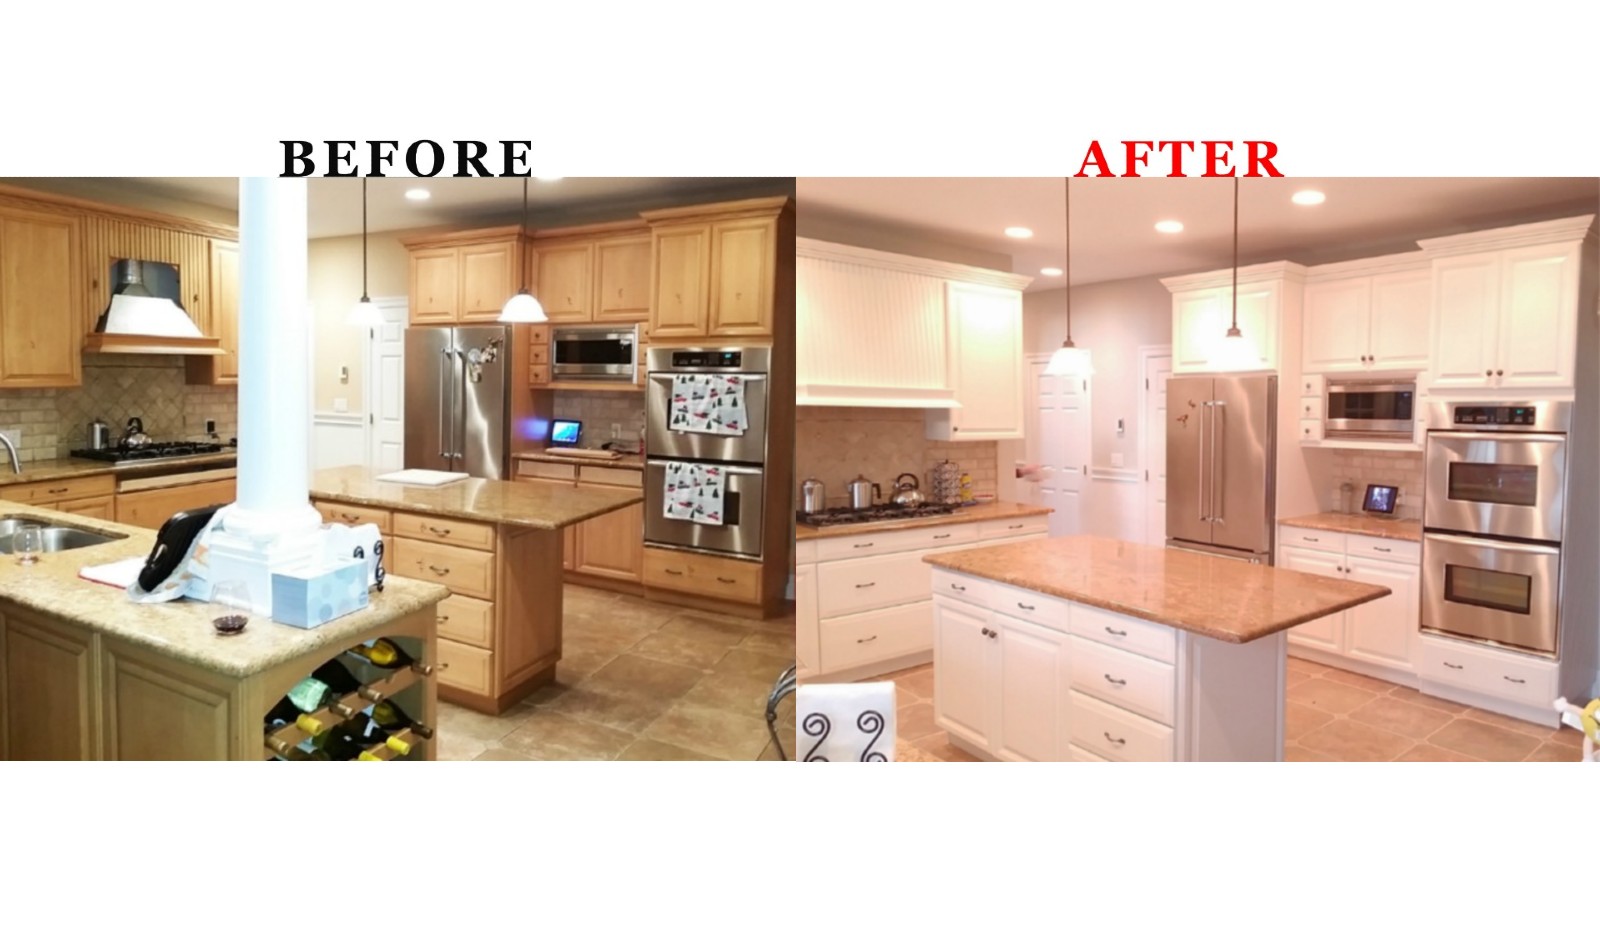 Kitchen Cabinet Painting Before And After | kitchen Cabinet Refinishing  Before and After | Spray Painting kitchen Cabinets Before and After |  http://kitchencabinet-painter.com/gallery/before-after